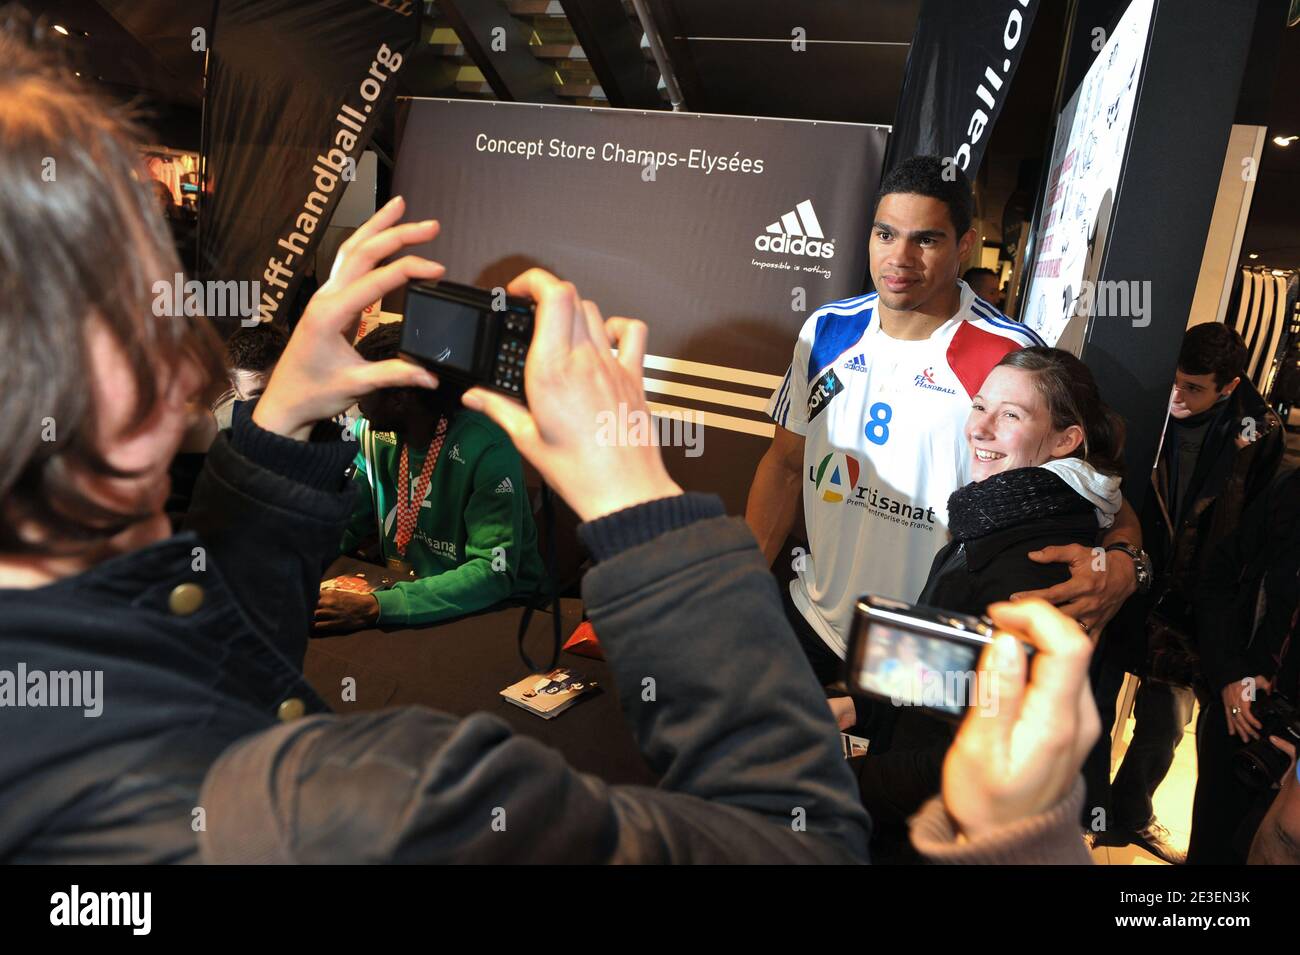 French player Nikola Karabatic at the Adidas store for a press conference,  in Paris, France on February 2d, 2009. The French national team won the  title of the 21st Men's World Handball